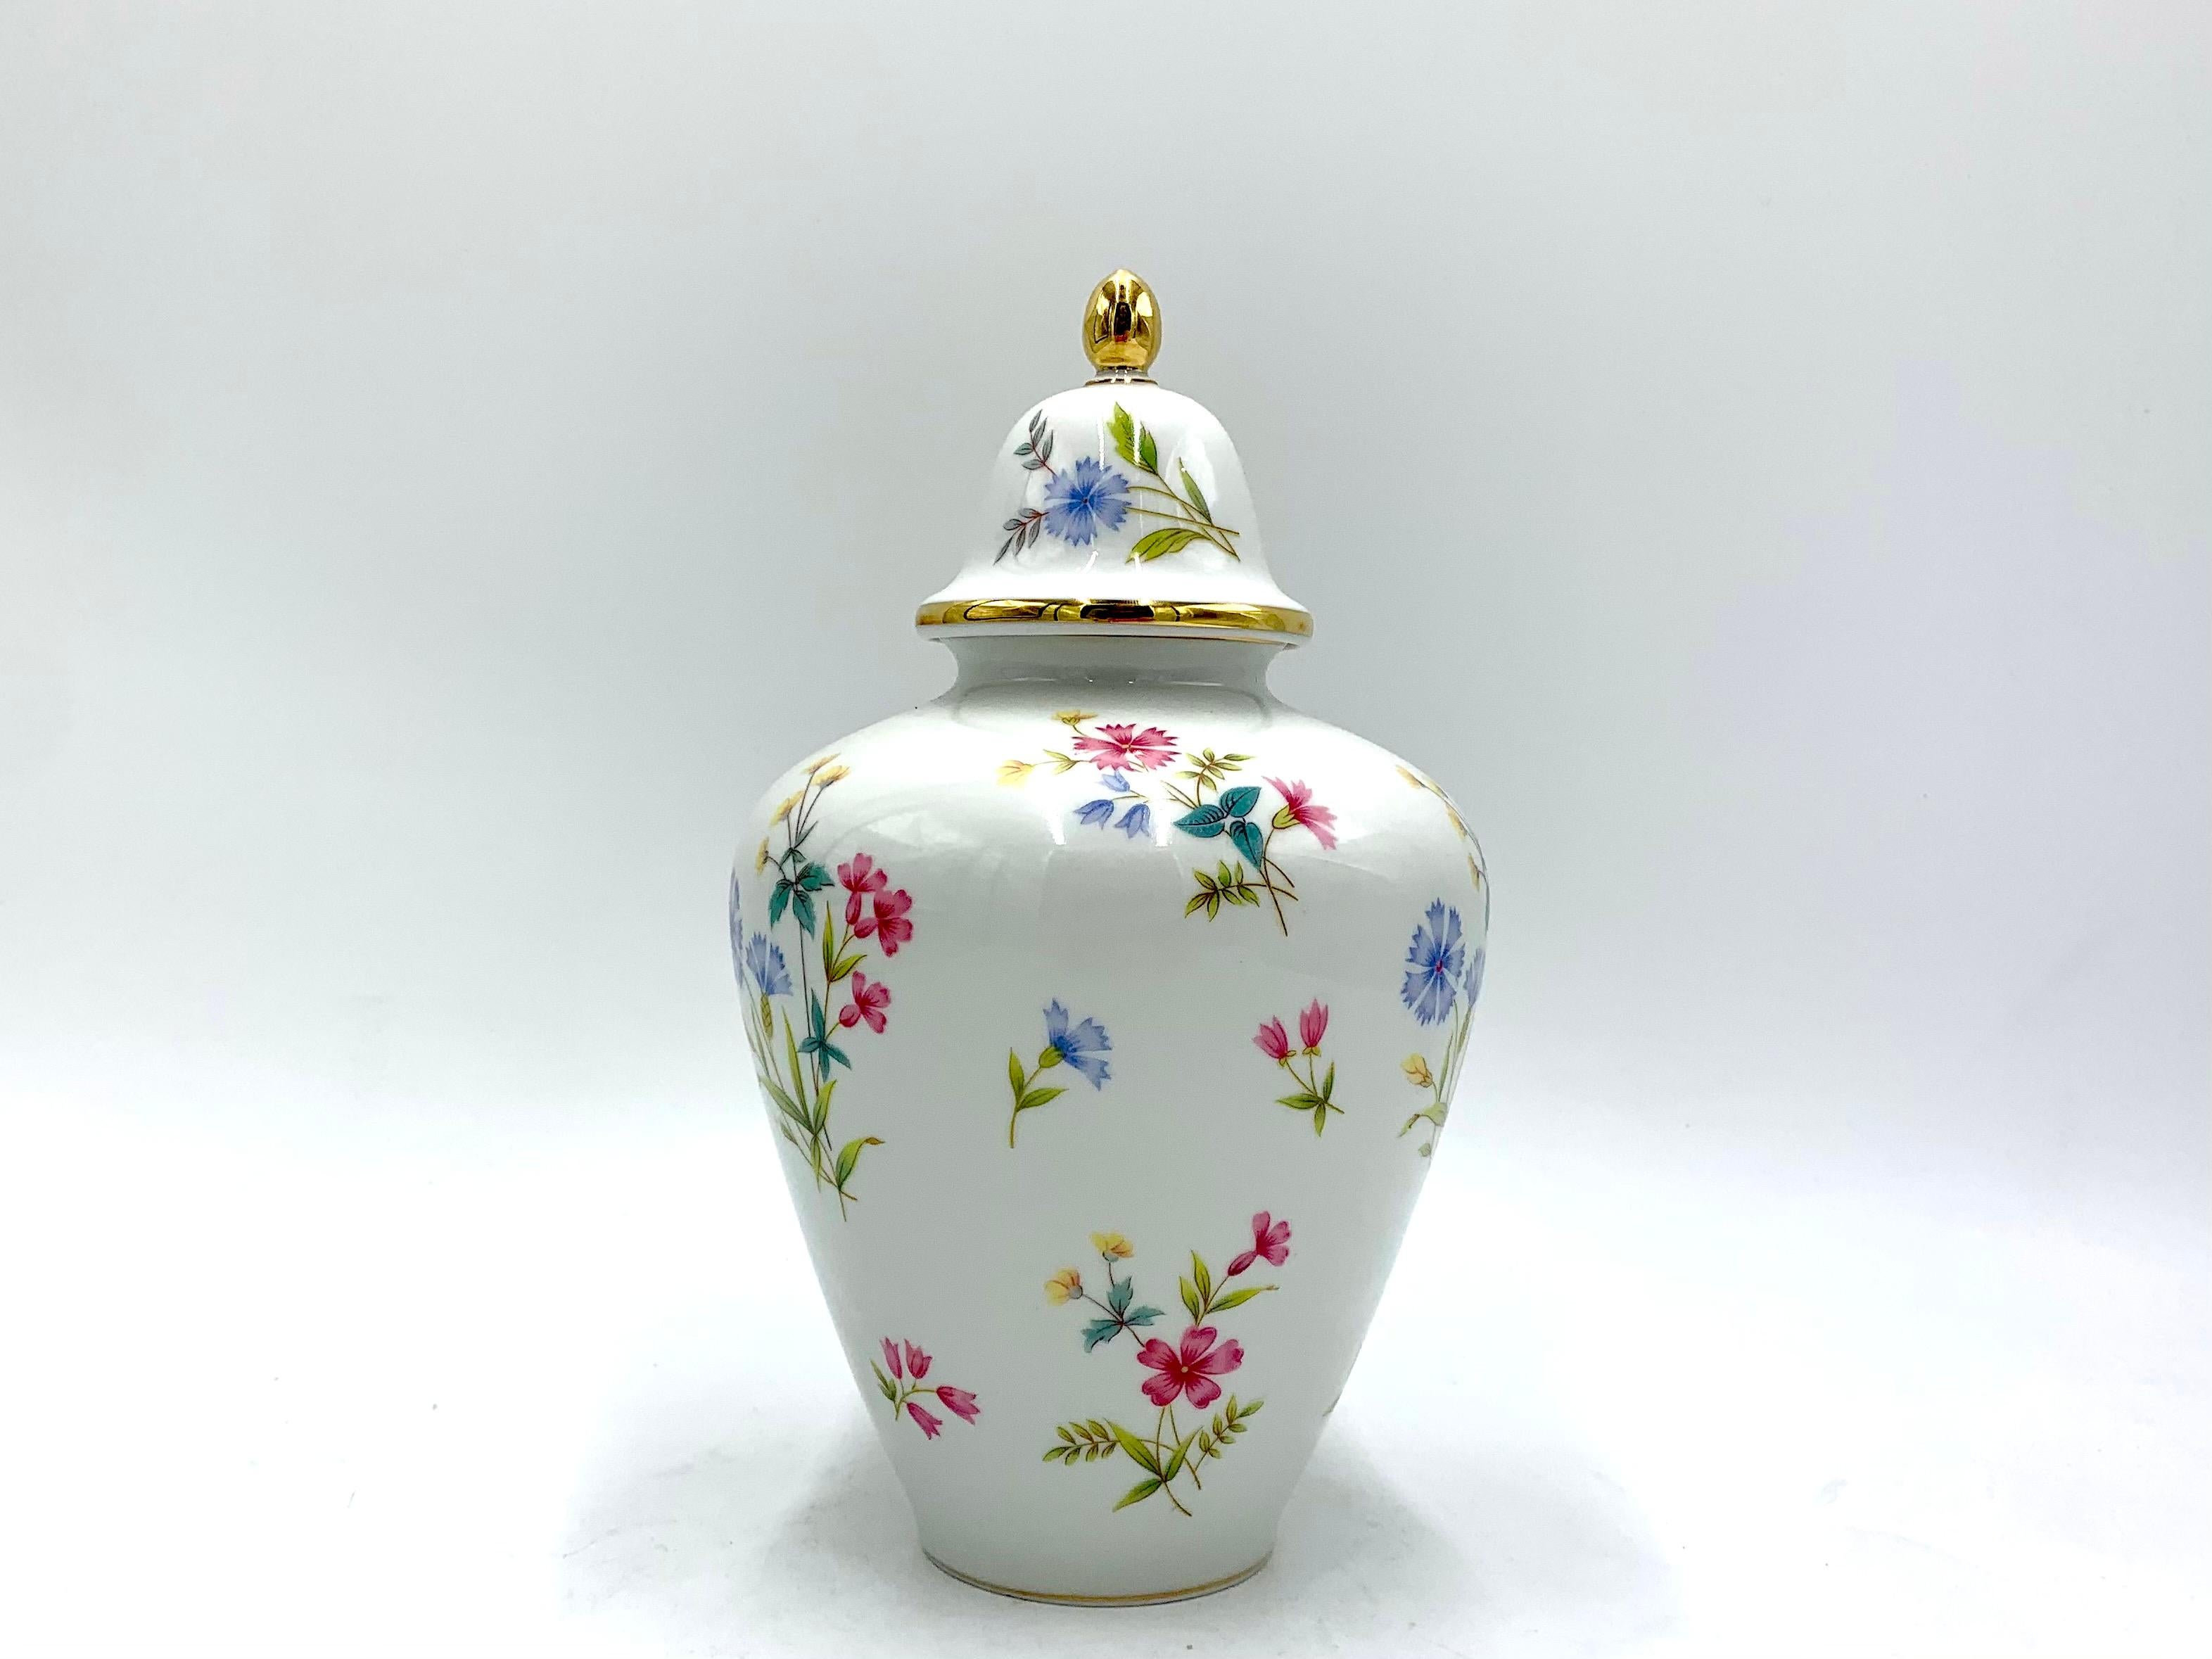 Porcelain amphora with gilding and a flower pattern.

Made in Germany in 1950-1965.

Very good condition, no damage.

Measures: Height 25cm, height without the lid 19cm, diameter 15cm.